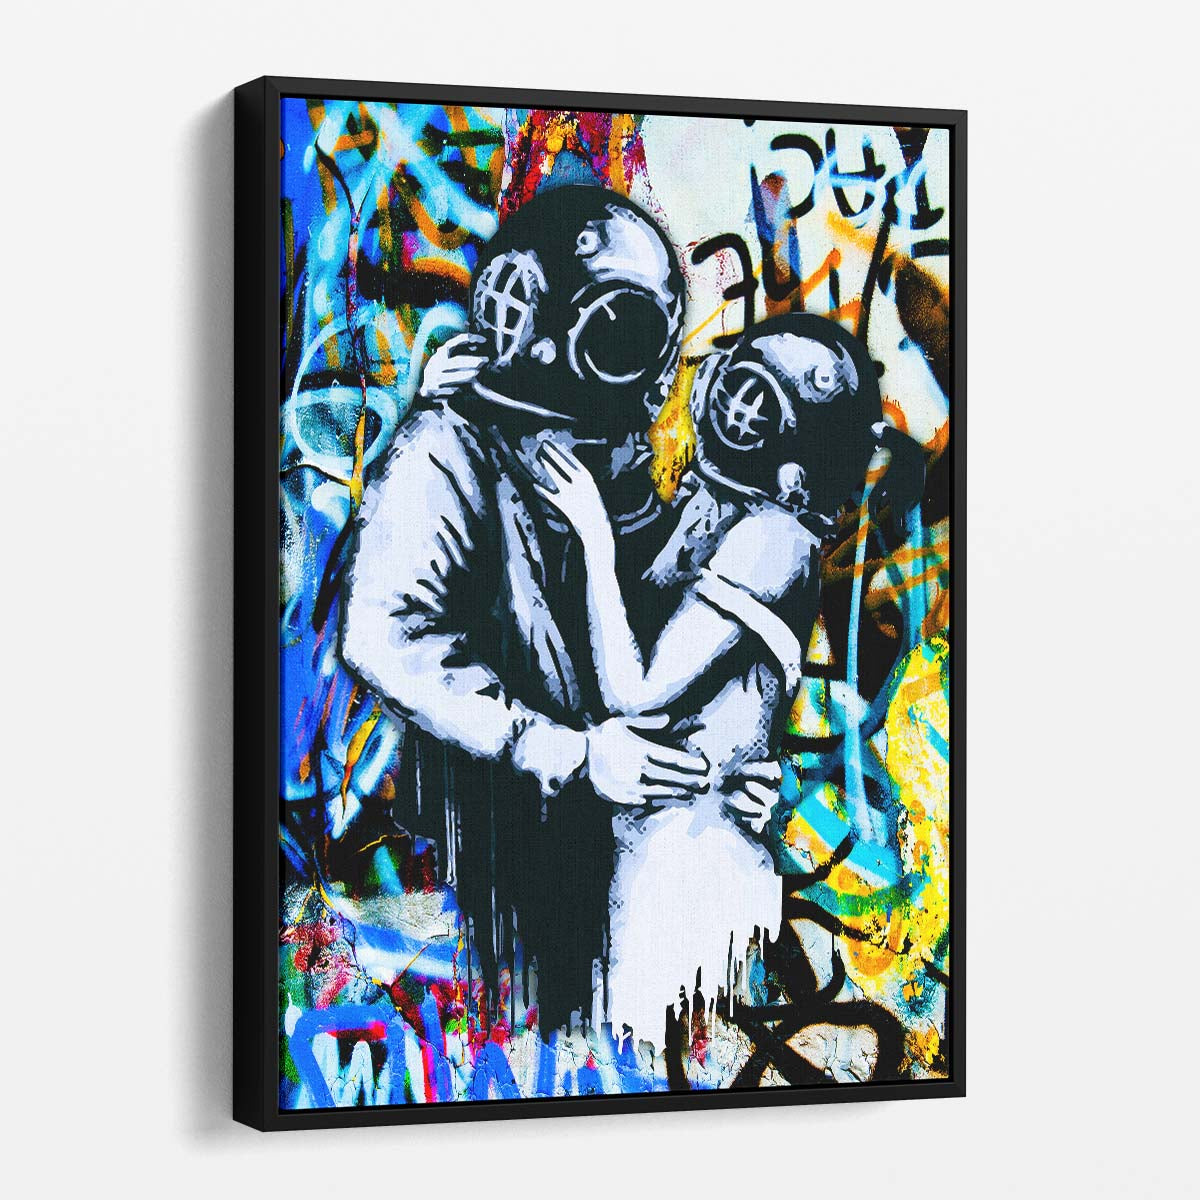 Banksy Diver Love Graffiti Wall Art by Luxuriance Designs. Made in USA.